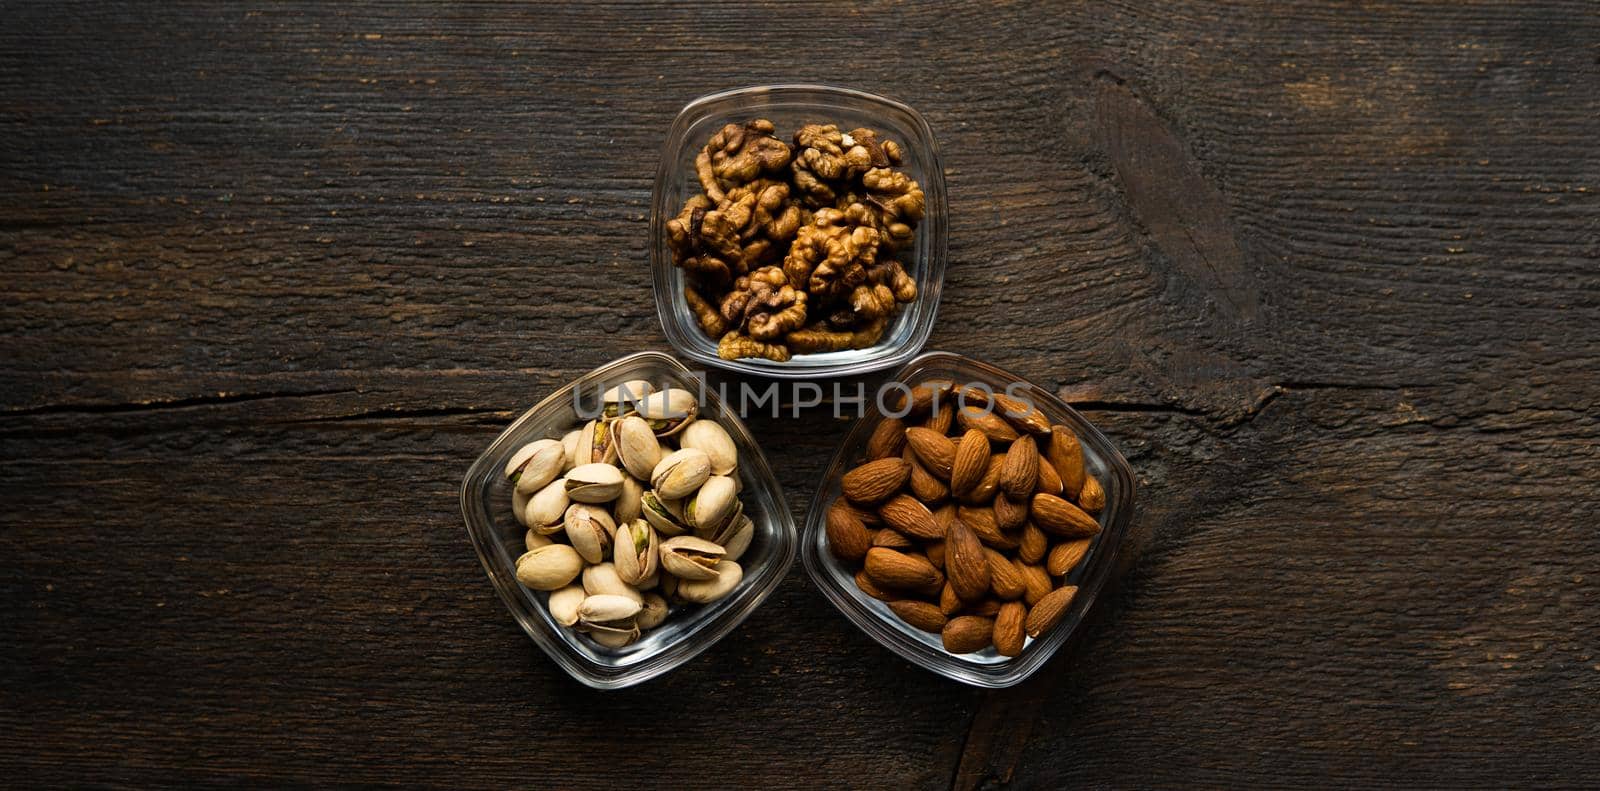 Almond, pistachio and walnut in a small plates which standing on a vintage wooden table. Nuts is a healthy vegetarian protein and nutritious food